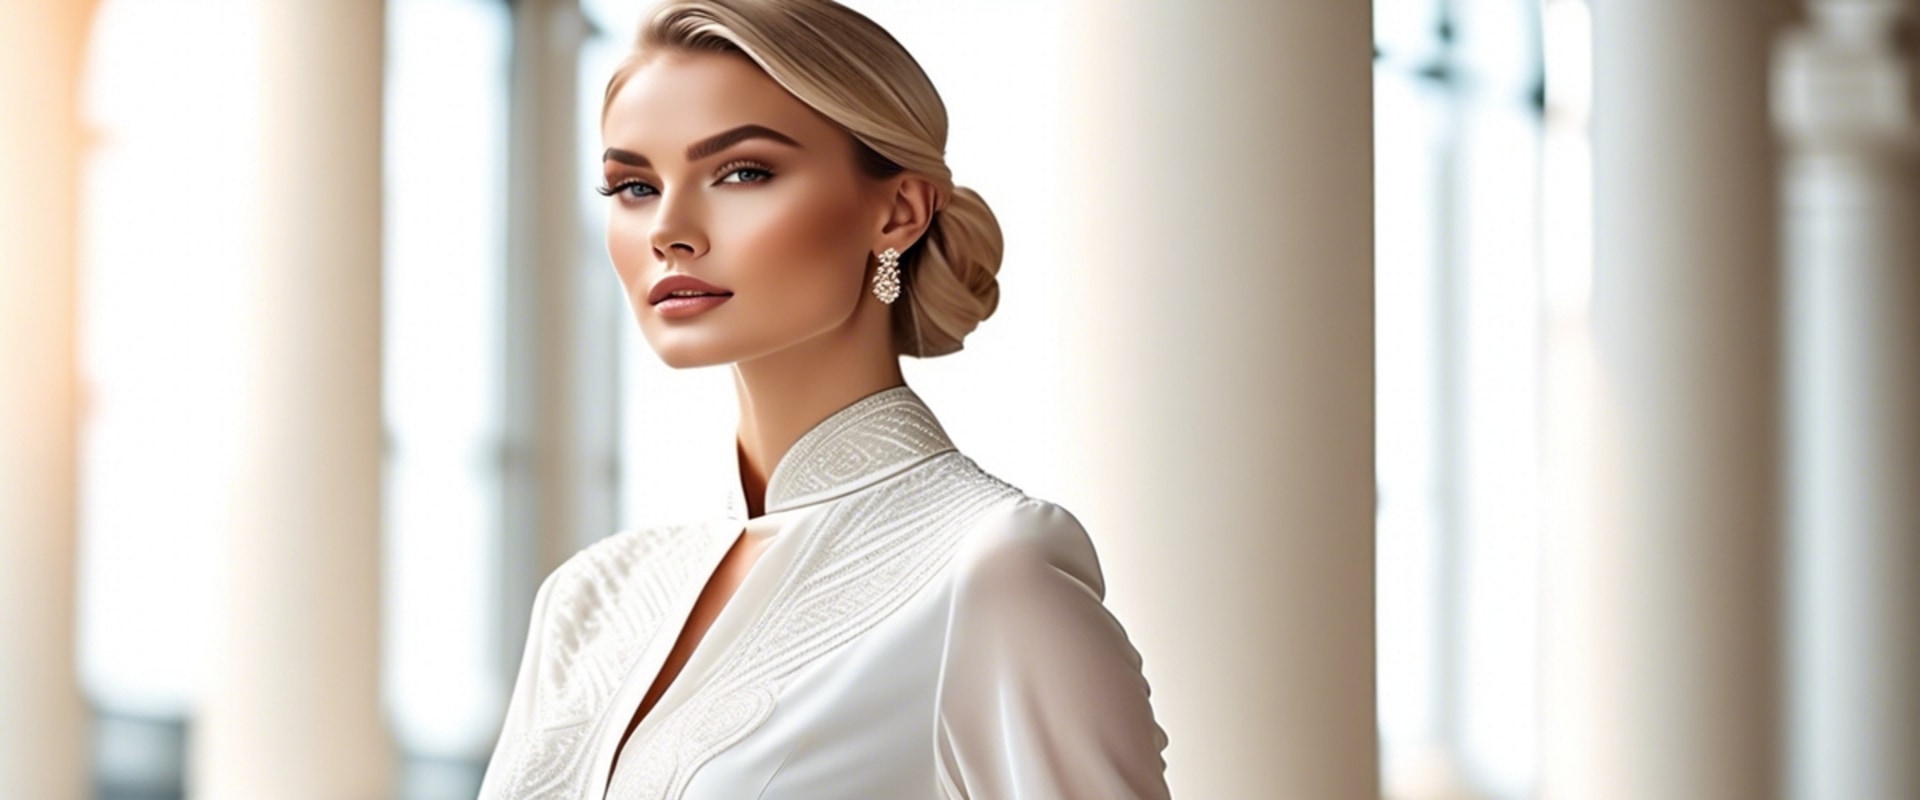 Modelling Agencies UK: Your Path to Professional Modelling